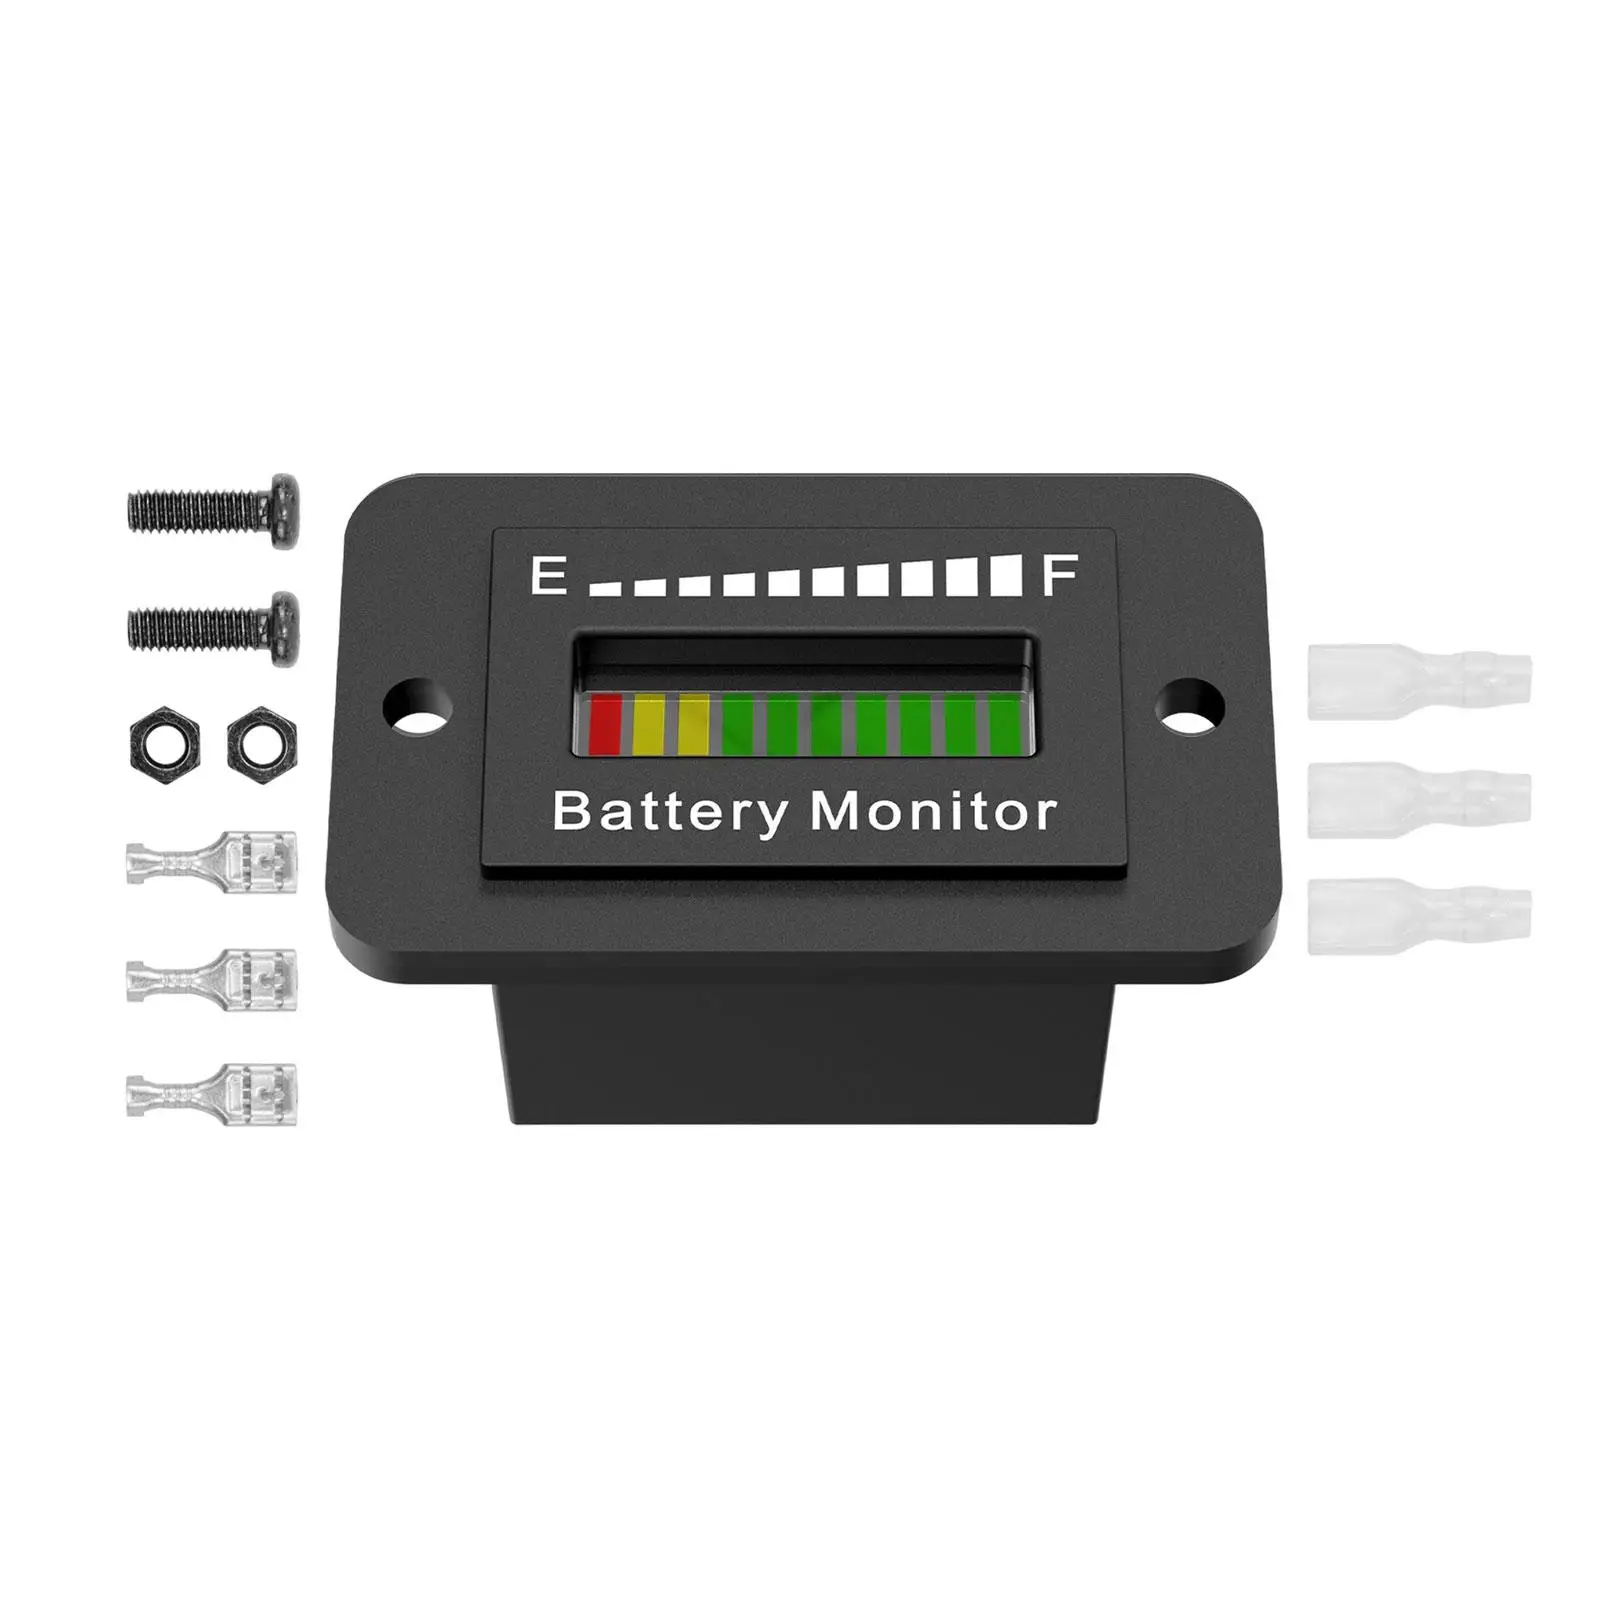 Battery Capacity Indicator IP65 Waterproof Battery Meter Battery Monitor for Golf Cart Forklift Scrubber Machine Trailer RV